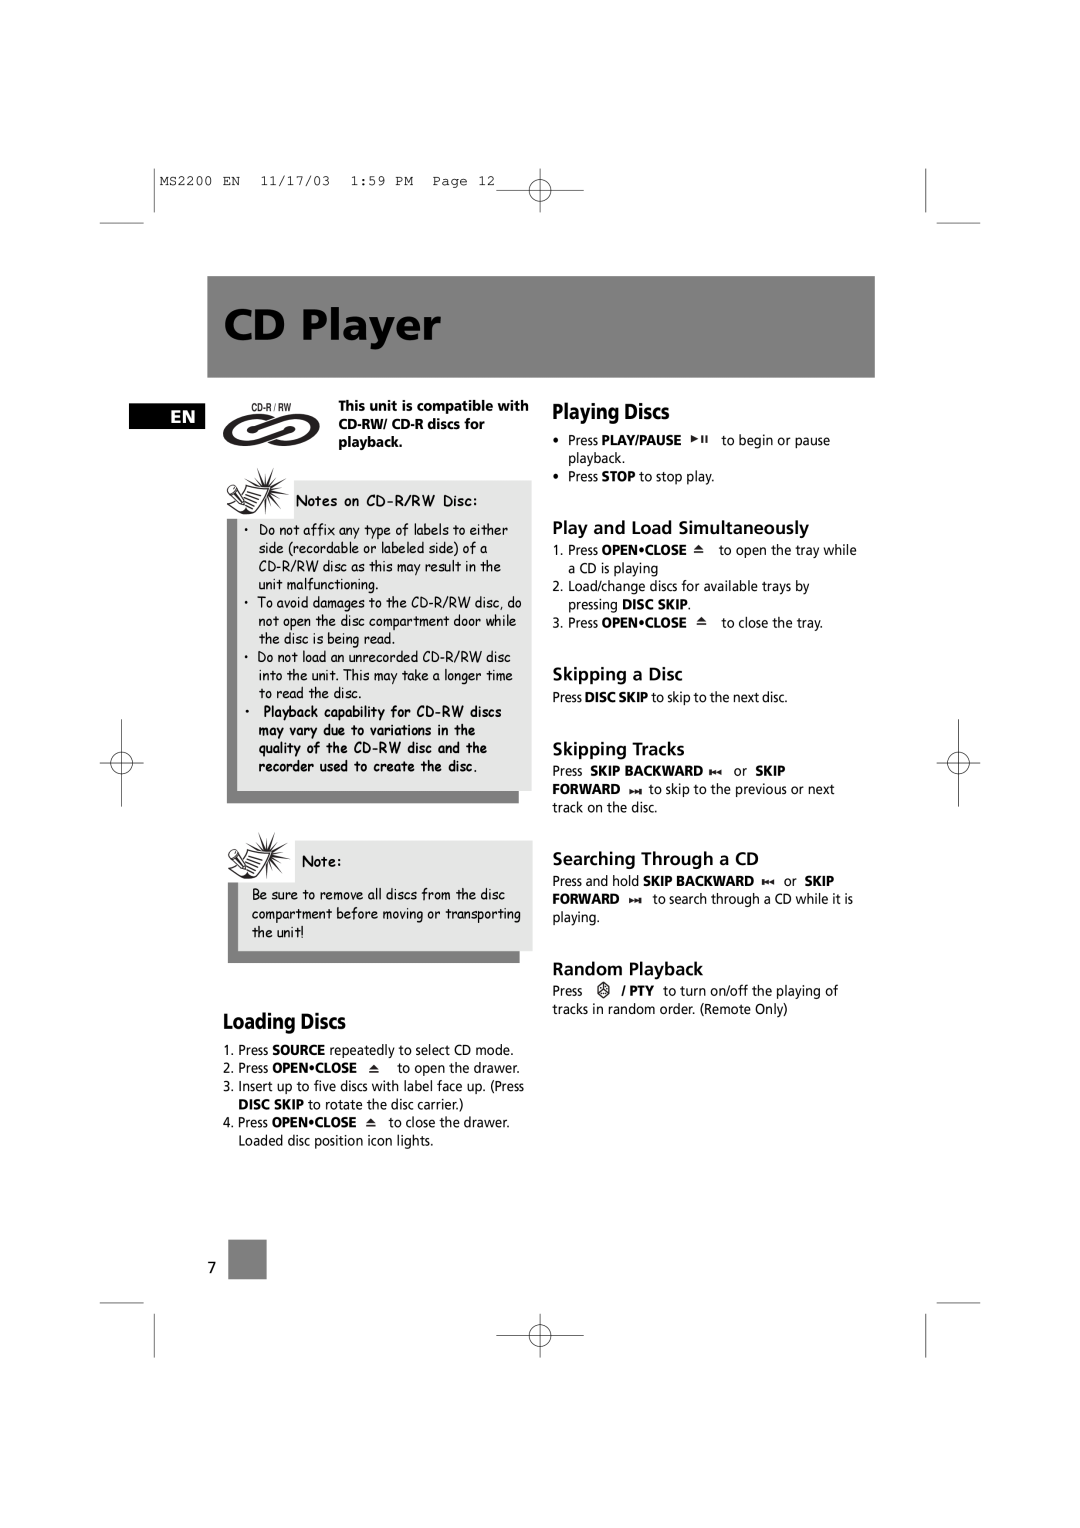 Technicolor - Thomson MS2200 CD Player, Loading Discs, Playing Discs, CD-RW/ CD-Rdiscs for, playback, Notes on CD-R/RWDisc 